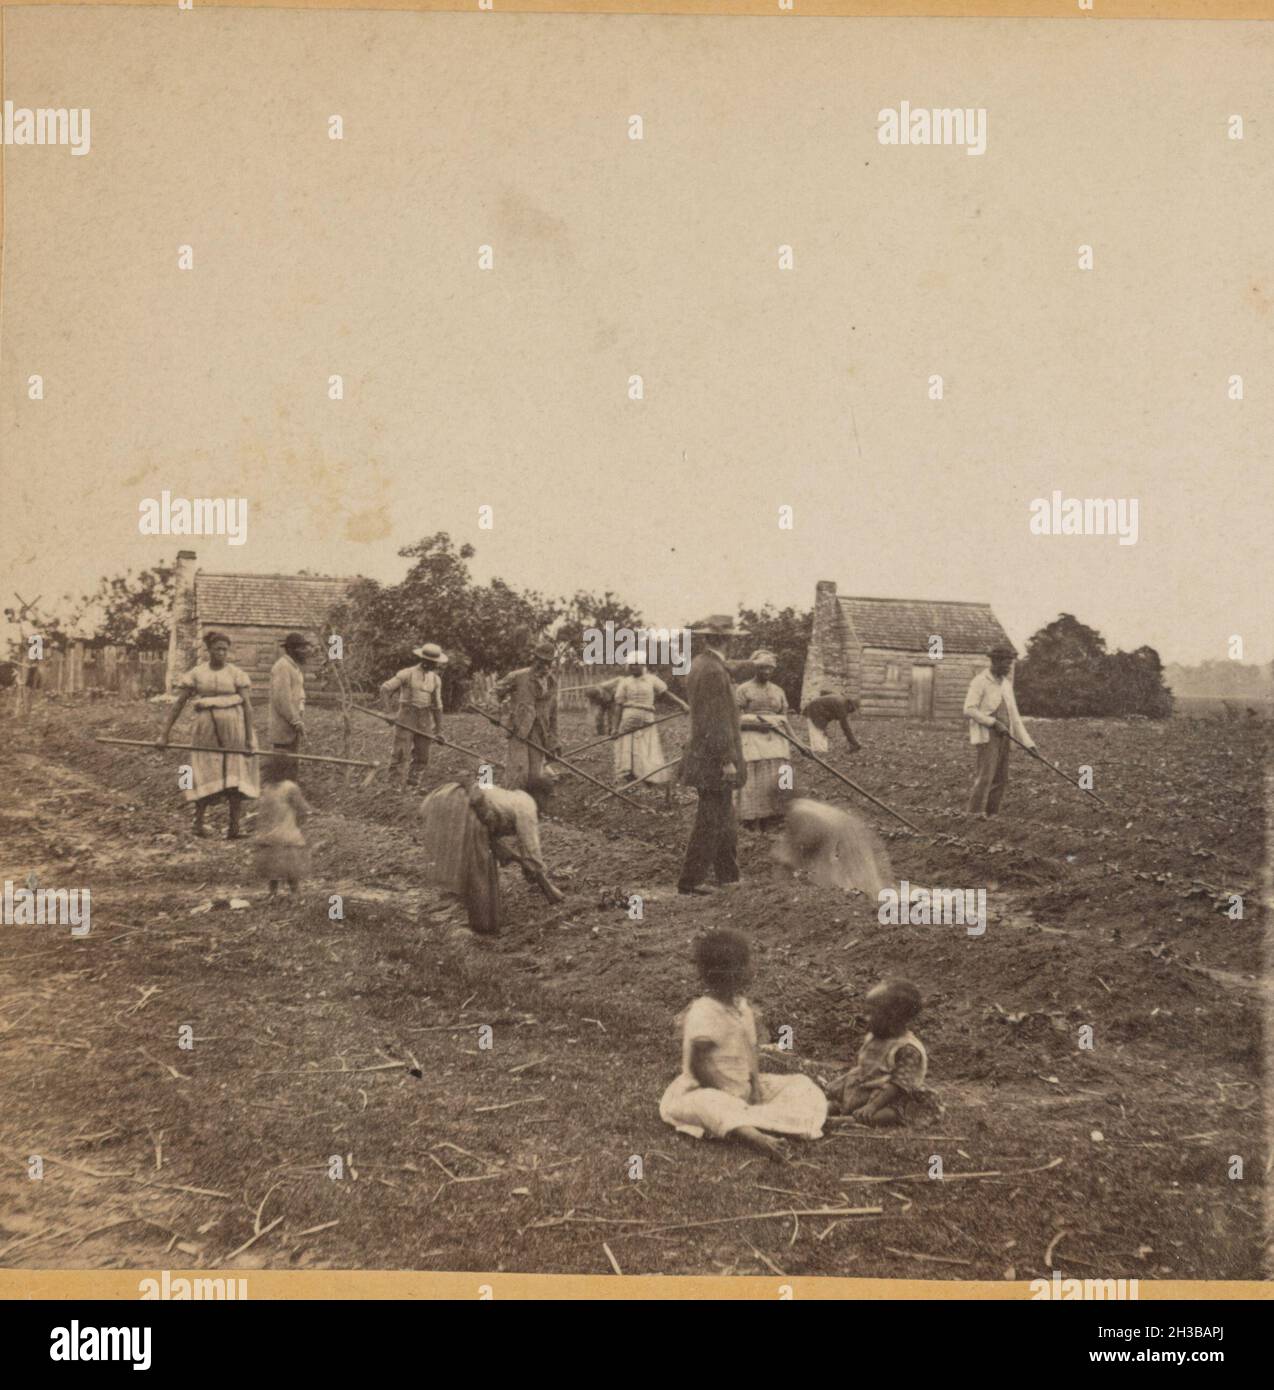 Vintage photograph circa 1863 during the confederacy era showing African American men women and children slaves with a white overseer working on a southern cotton plantation at St. Helena Island, South Carolina  USA Stock Photo